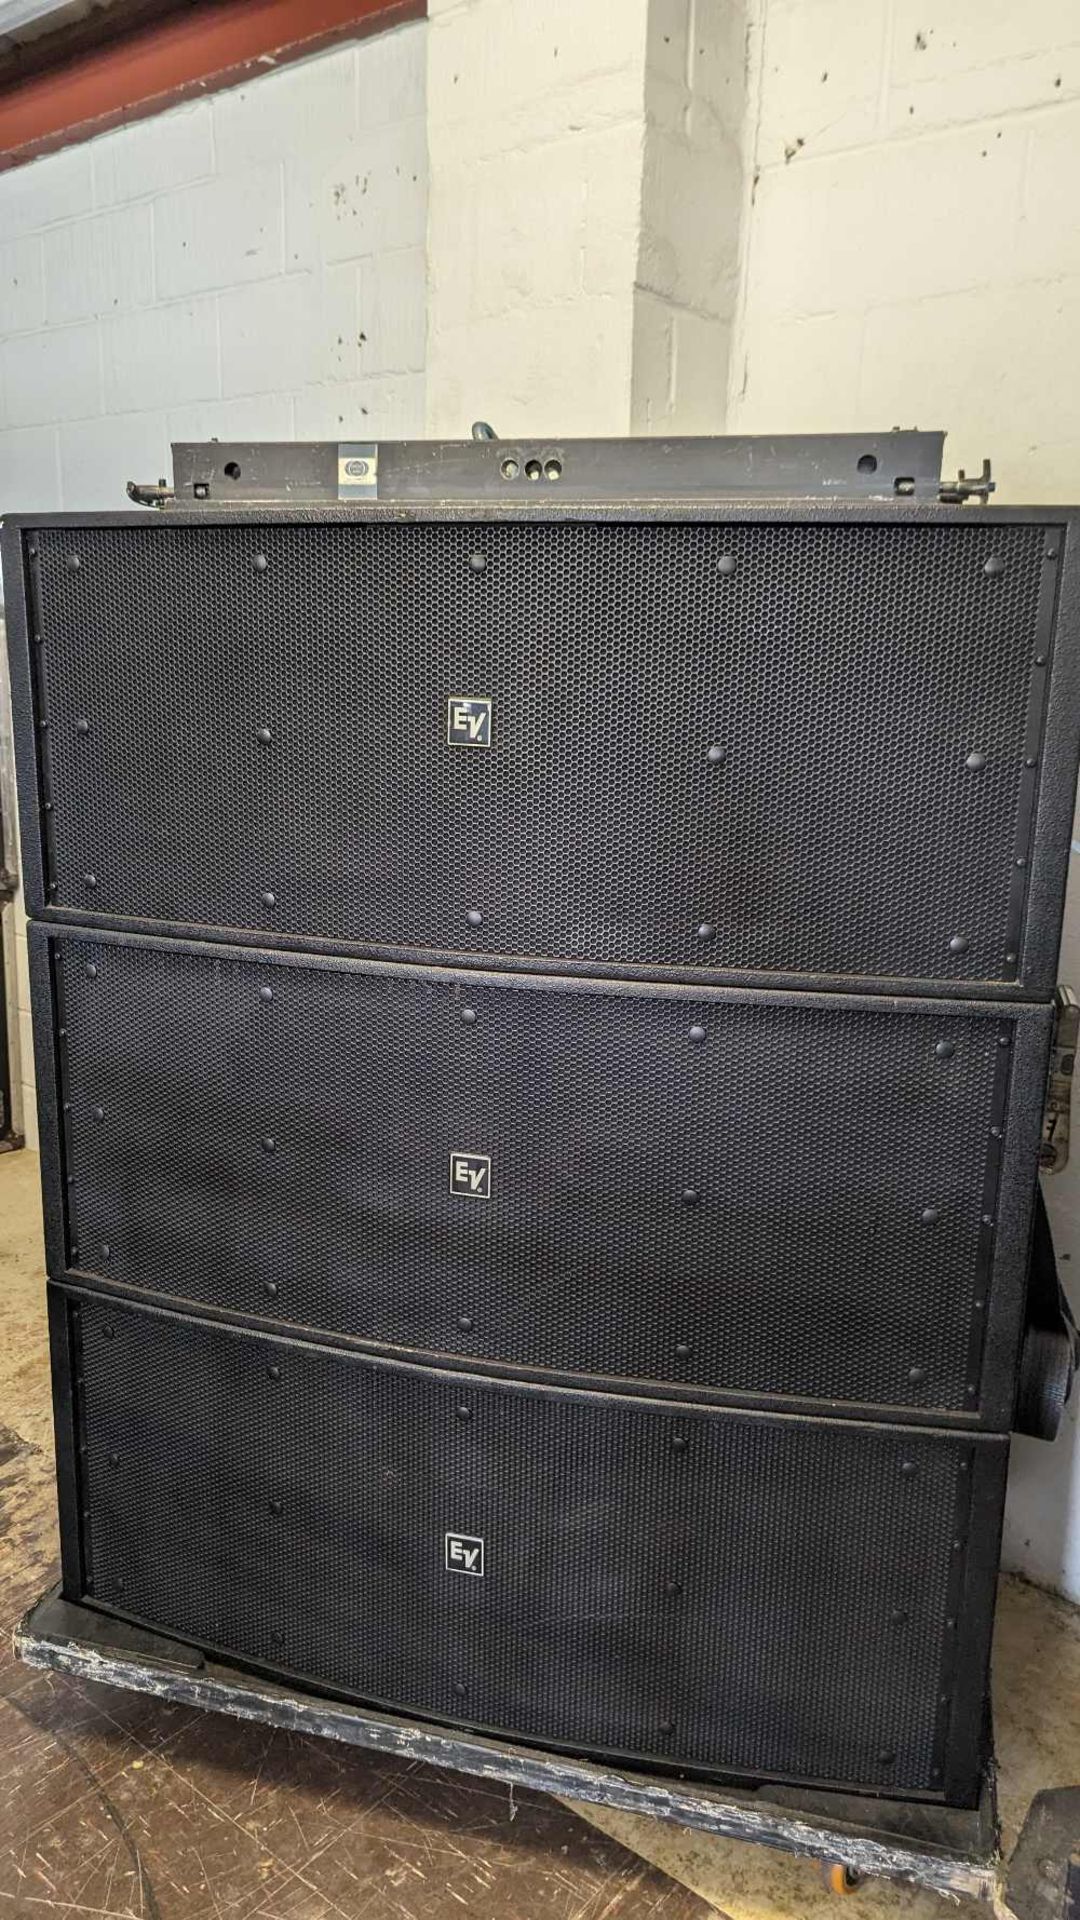 Electro-Voice PA Sound System - (12) XLC127 DVX Speakers, (6) X-Line Subs & Associated Equipment - Image 7 of 27